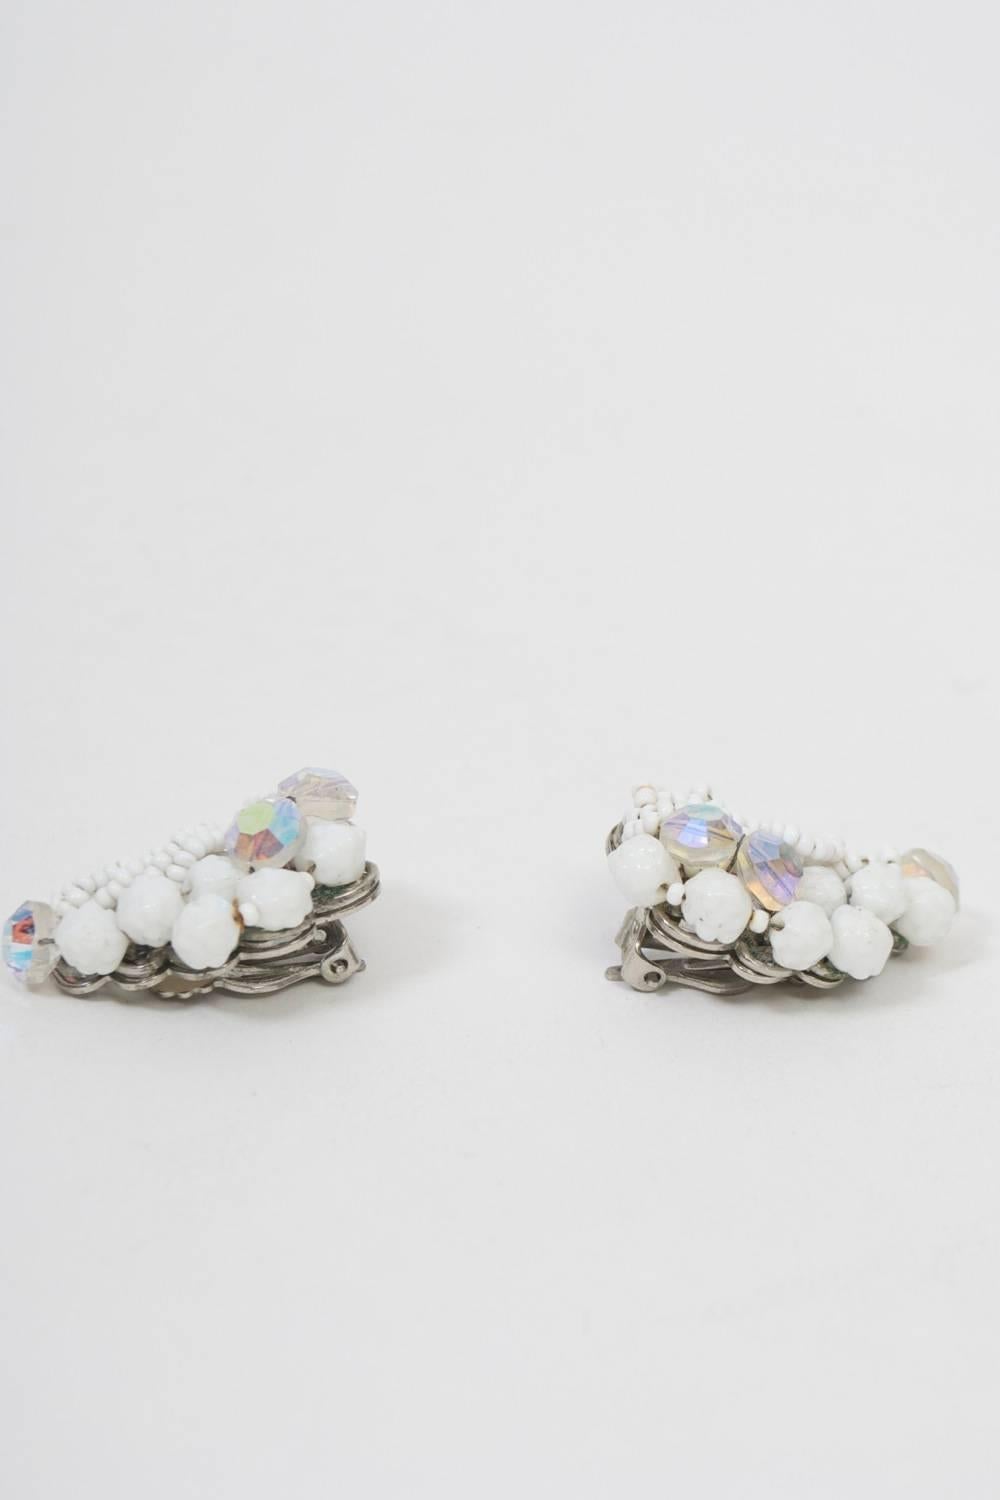 Crescent-shaped clip-on earrings by Robert, much of whose work resembled that of Miriam Haskell. These are composed primarily  of white beads, some diminutive and smooth, the others larger and faceted. Each earring is further embellished with ABA